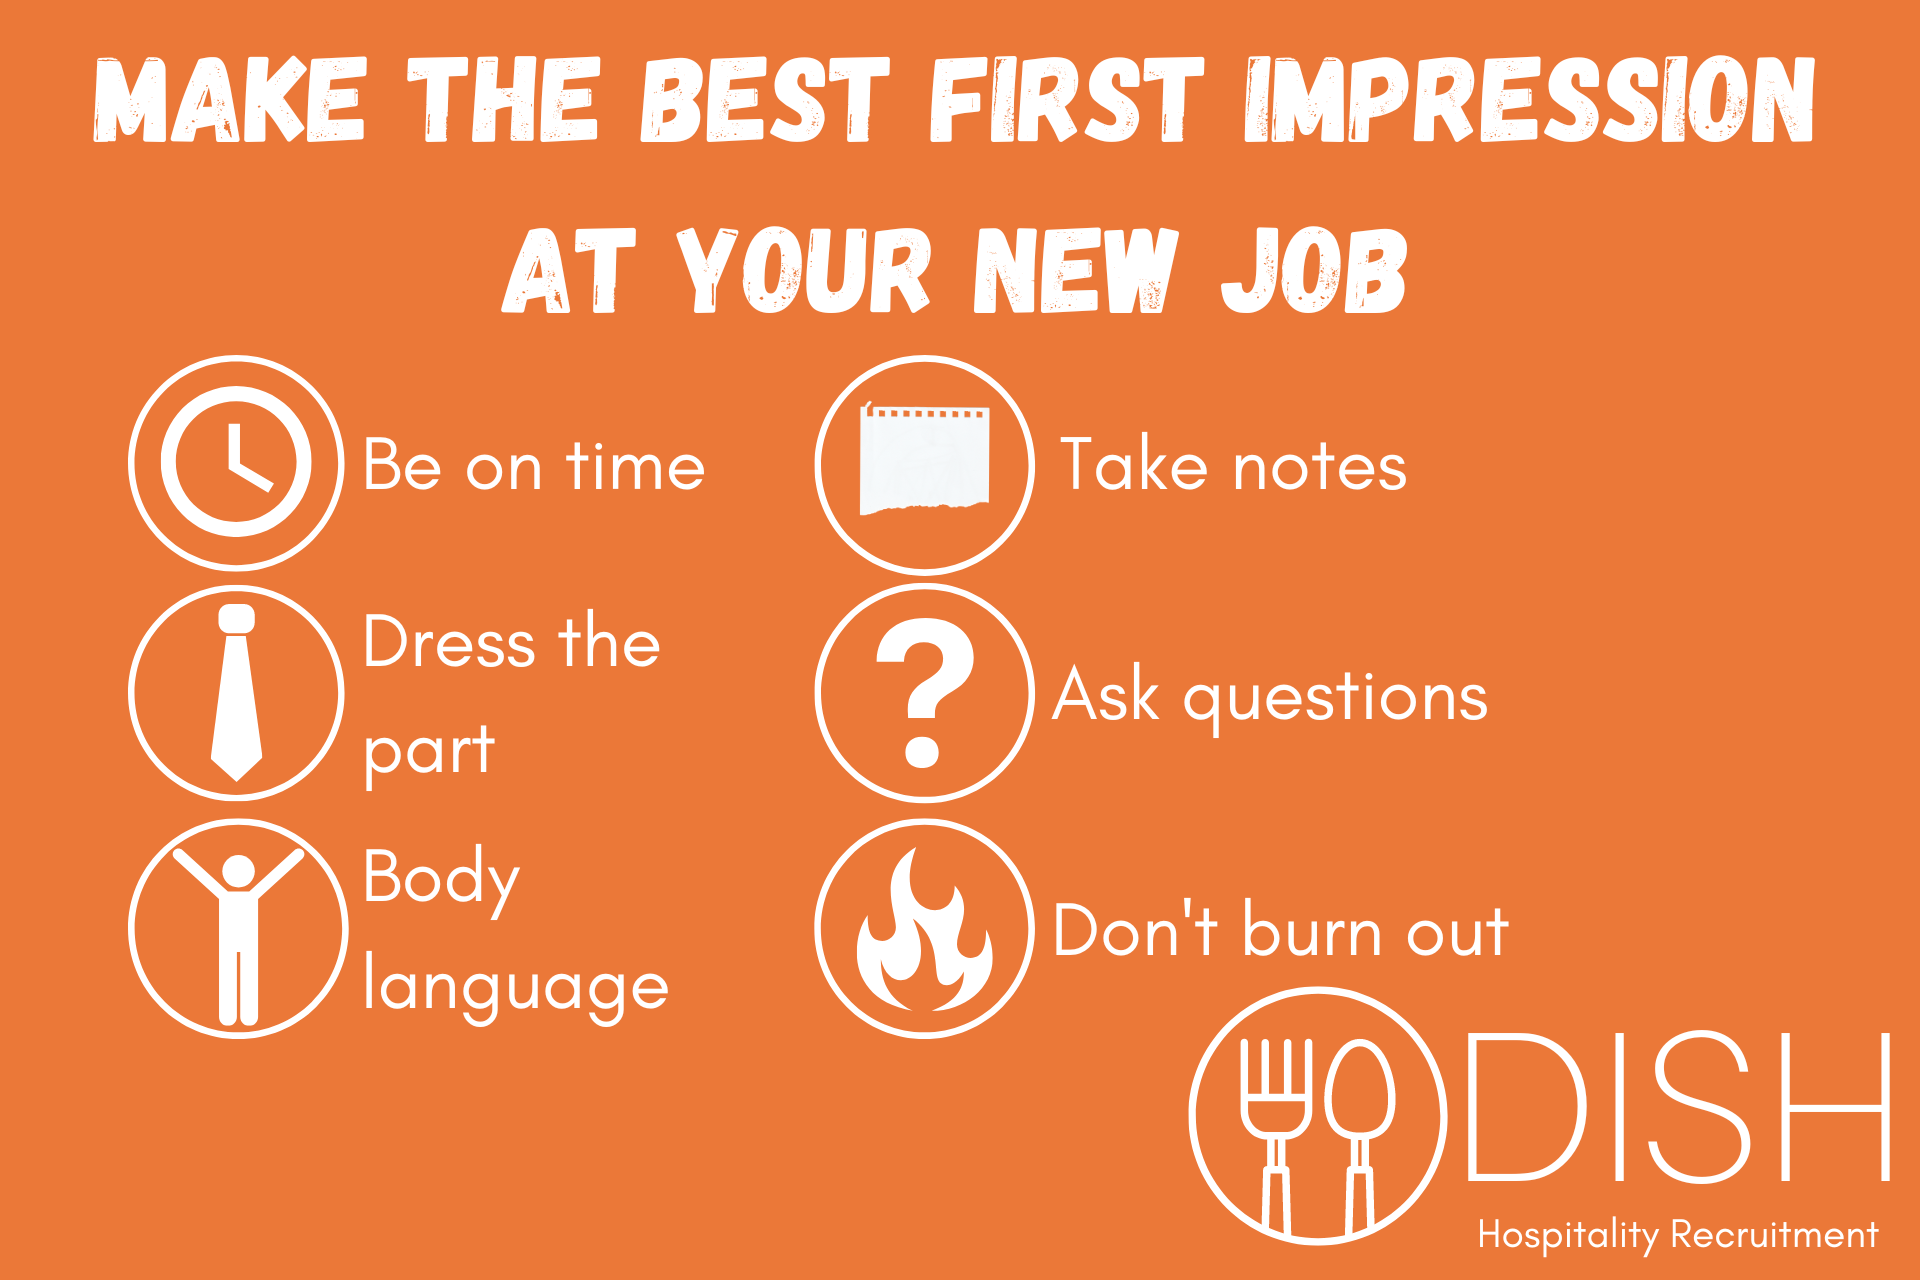 How to Make the Best First Impression When Starting a New Job